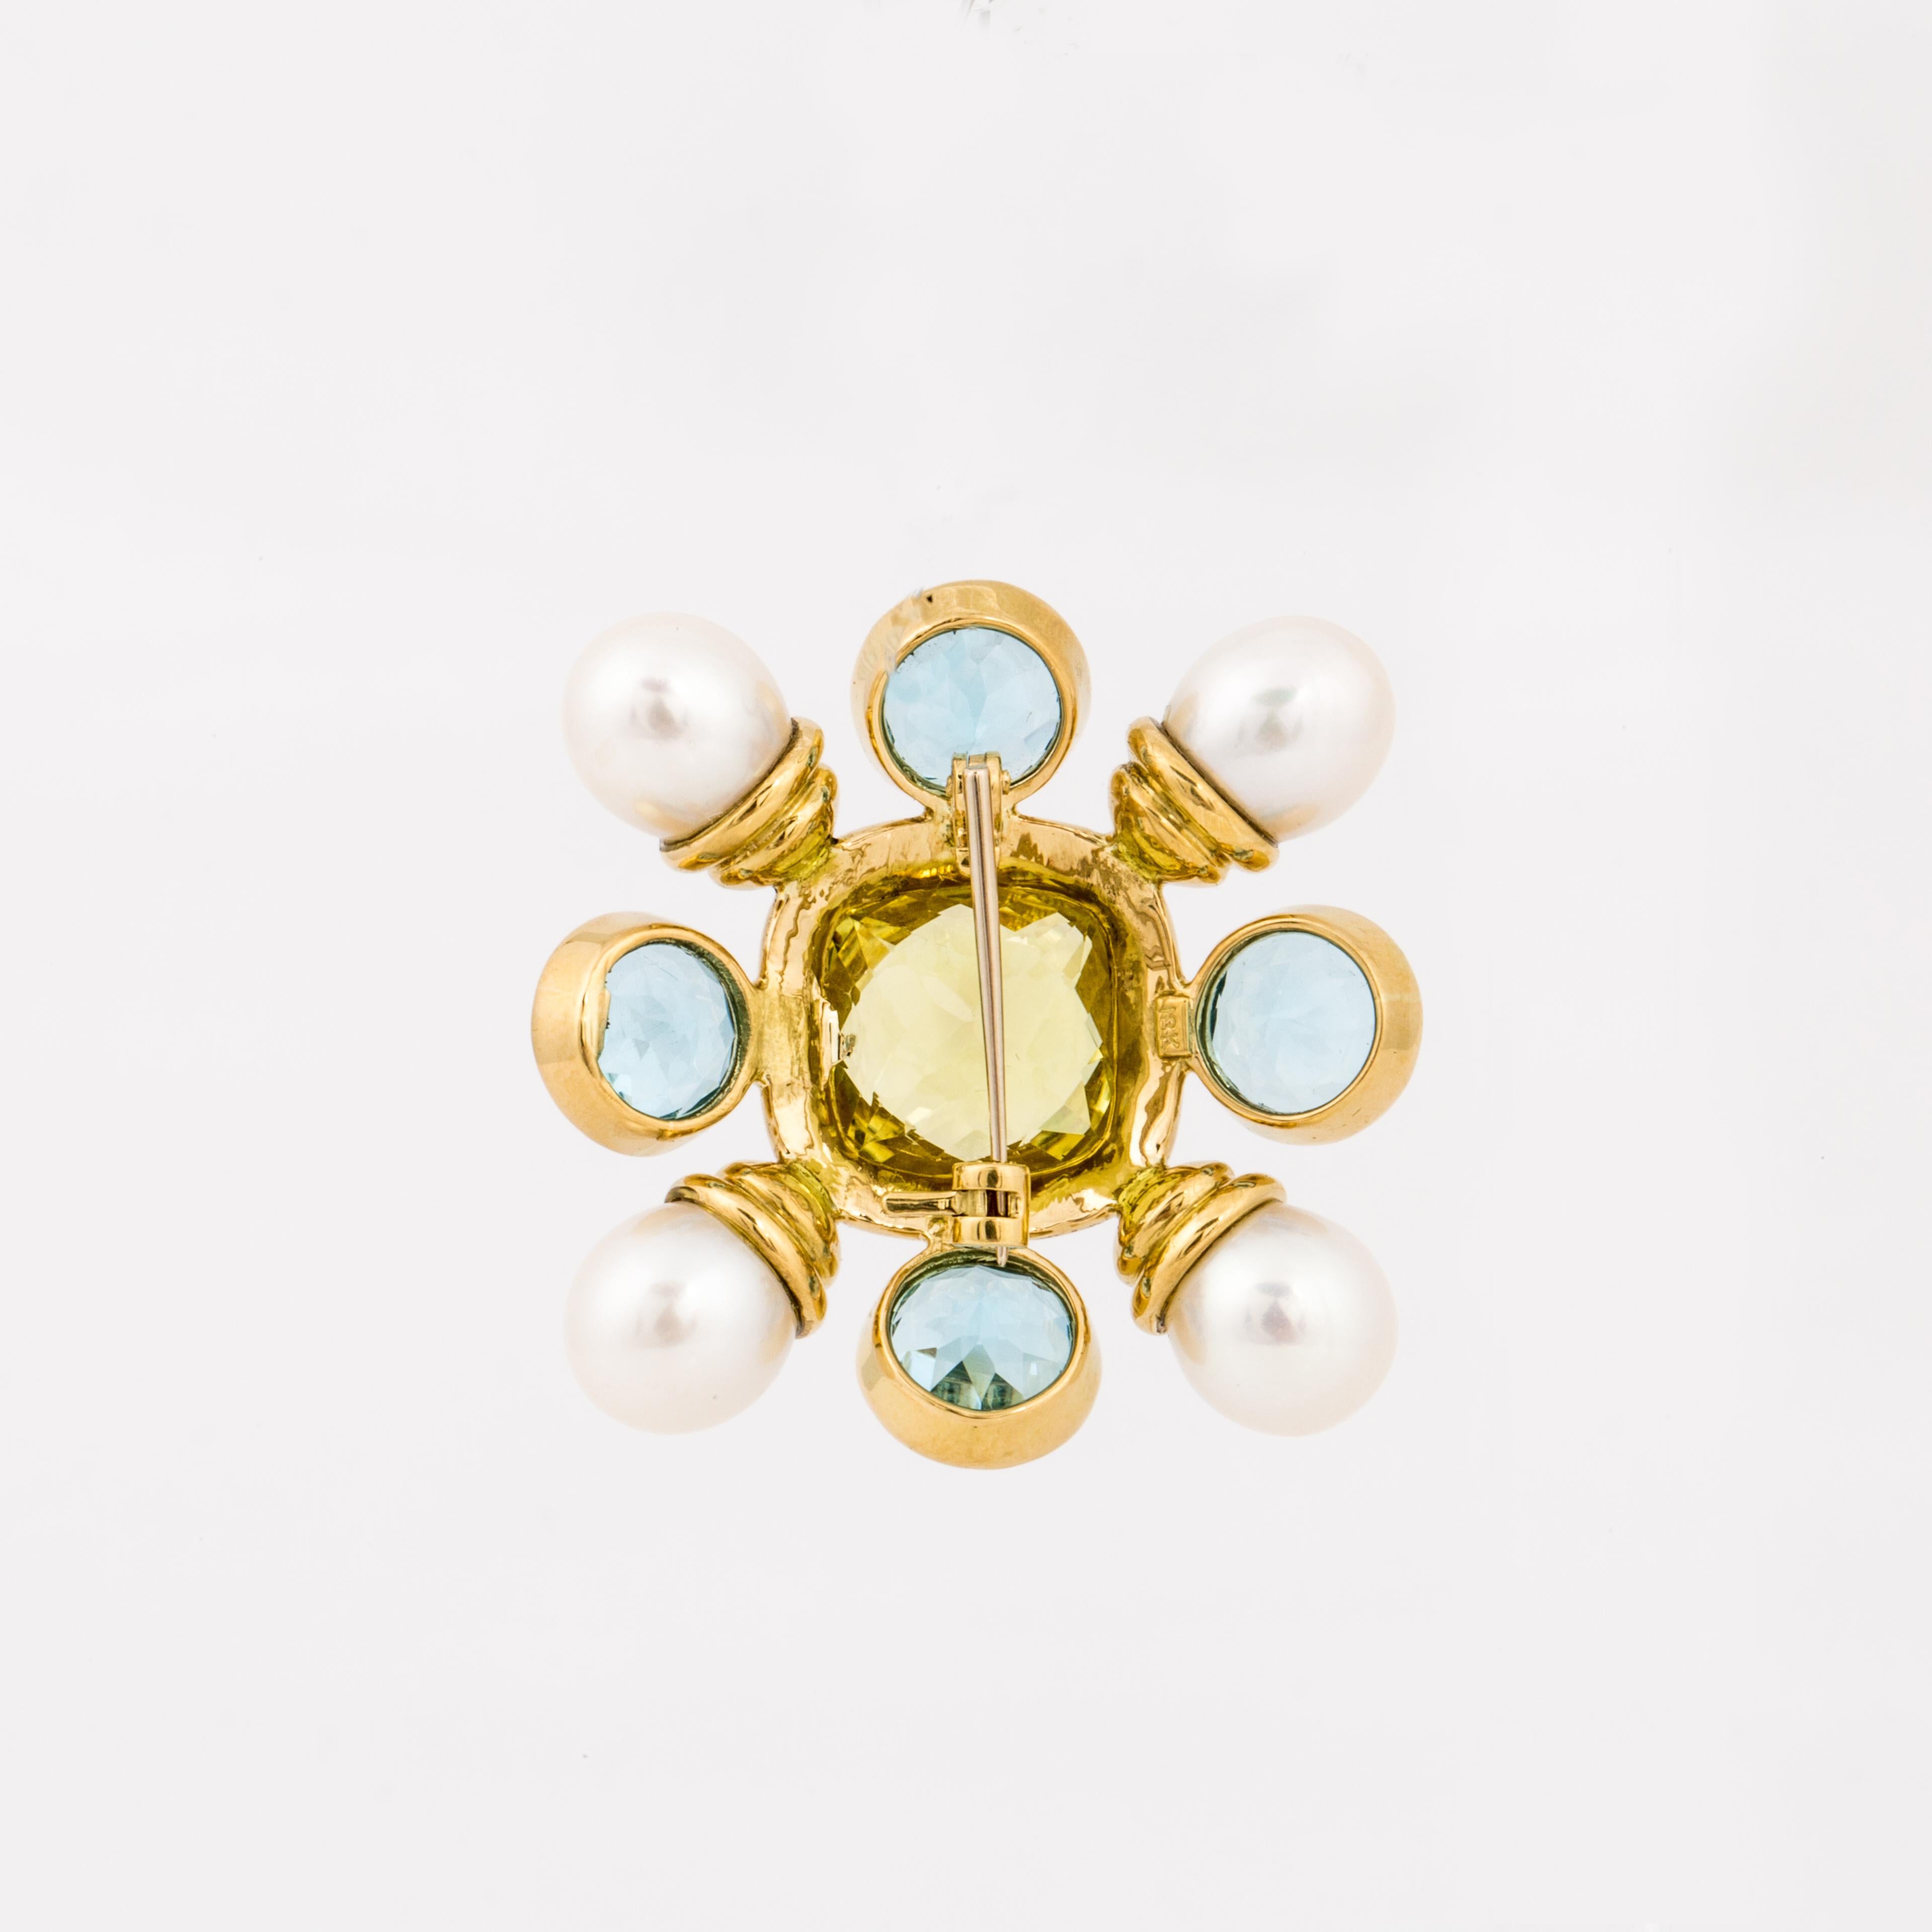 18K yellow gold pin set with pearls, blue topaz and Peridot.  There are four (4) cultured pearls measuring 8.9mm - 9.4mm.  In addition, there are four (4) round faceted Blue Topaz and one (1) cushion cut Peridot.  Measures 1-5/8